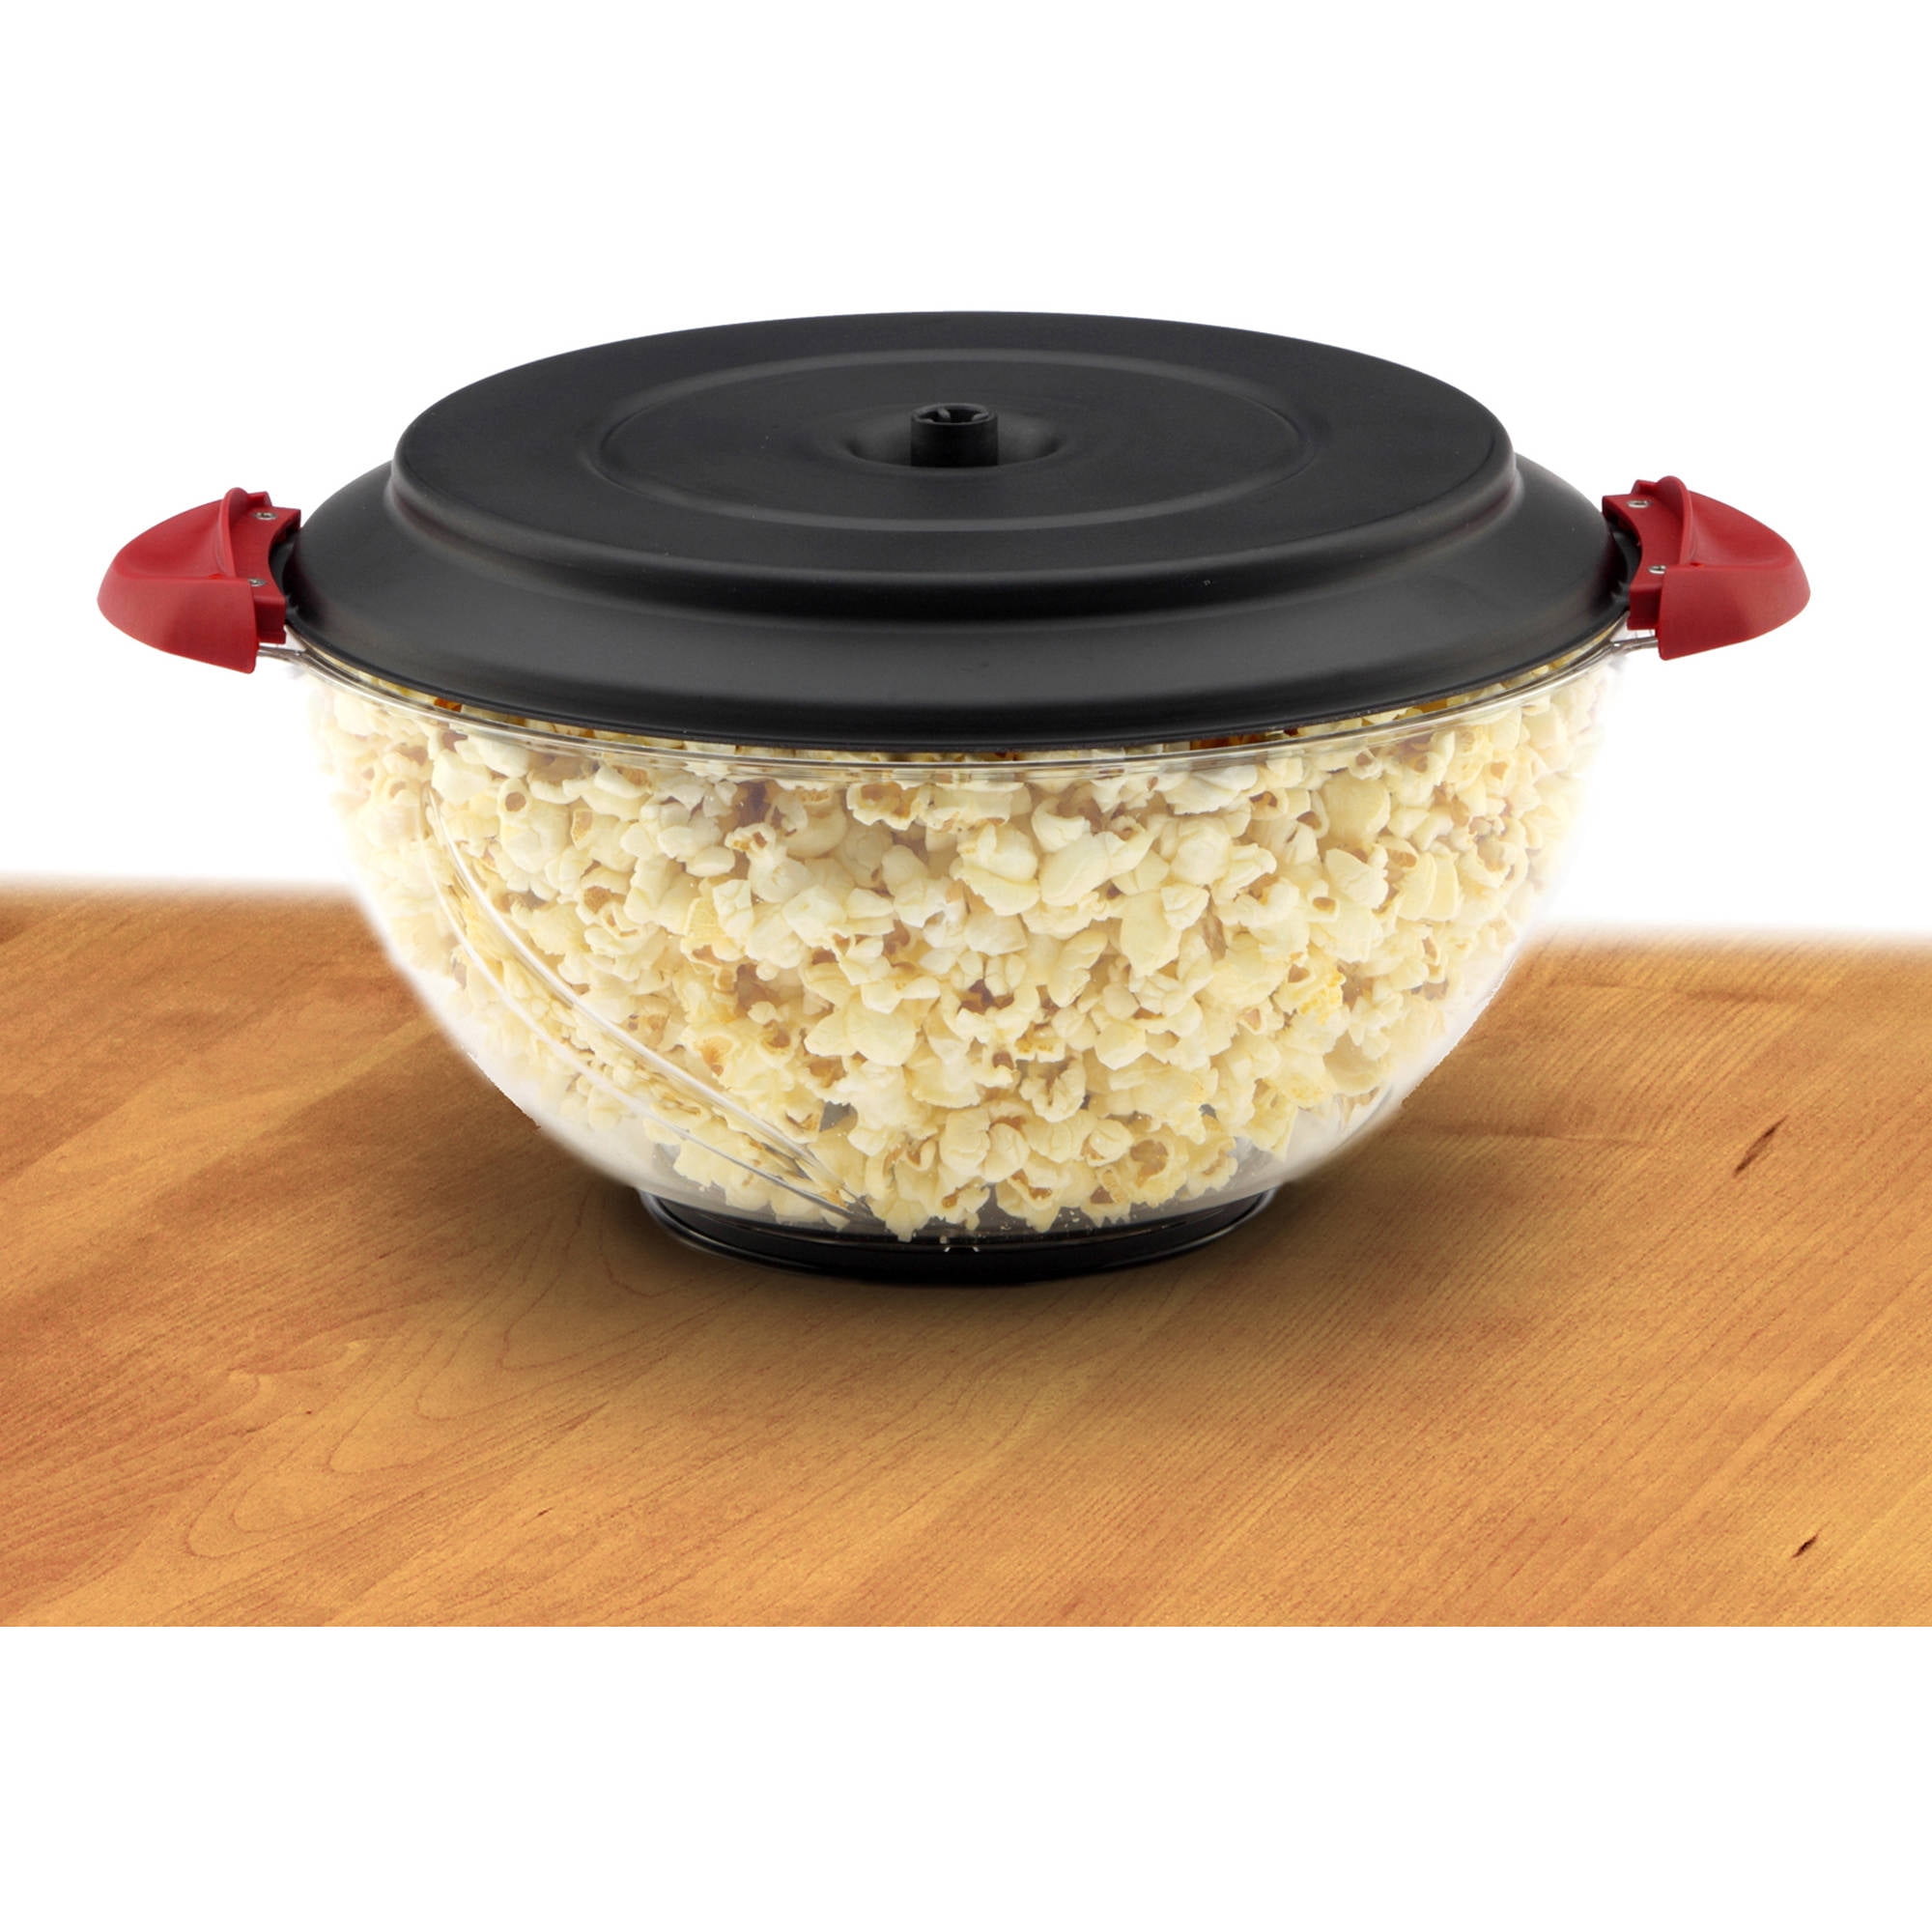 West Bend Stir Crazy Deluxe Popcorn Popper Review: Fun, But Flawed